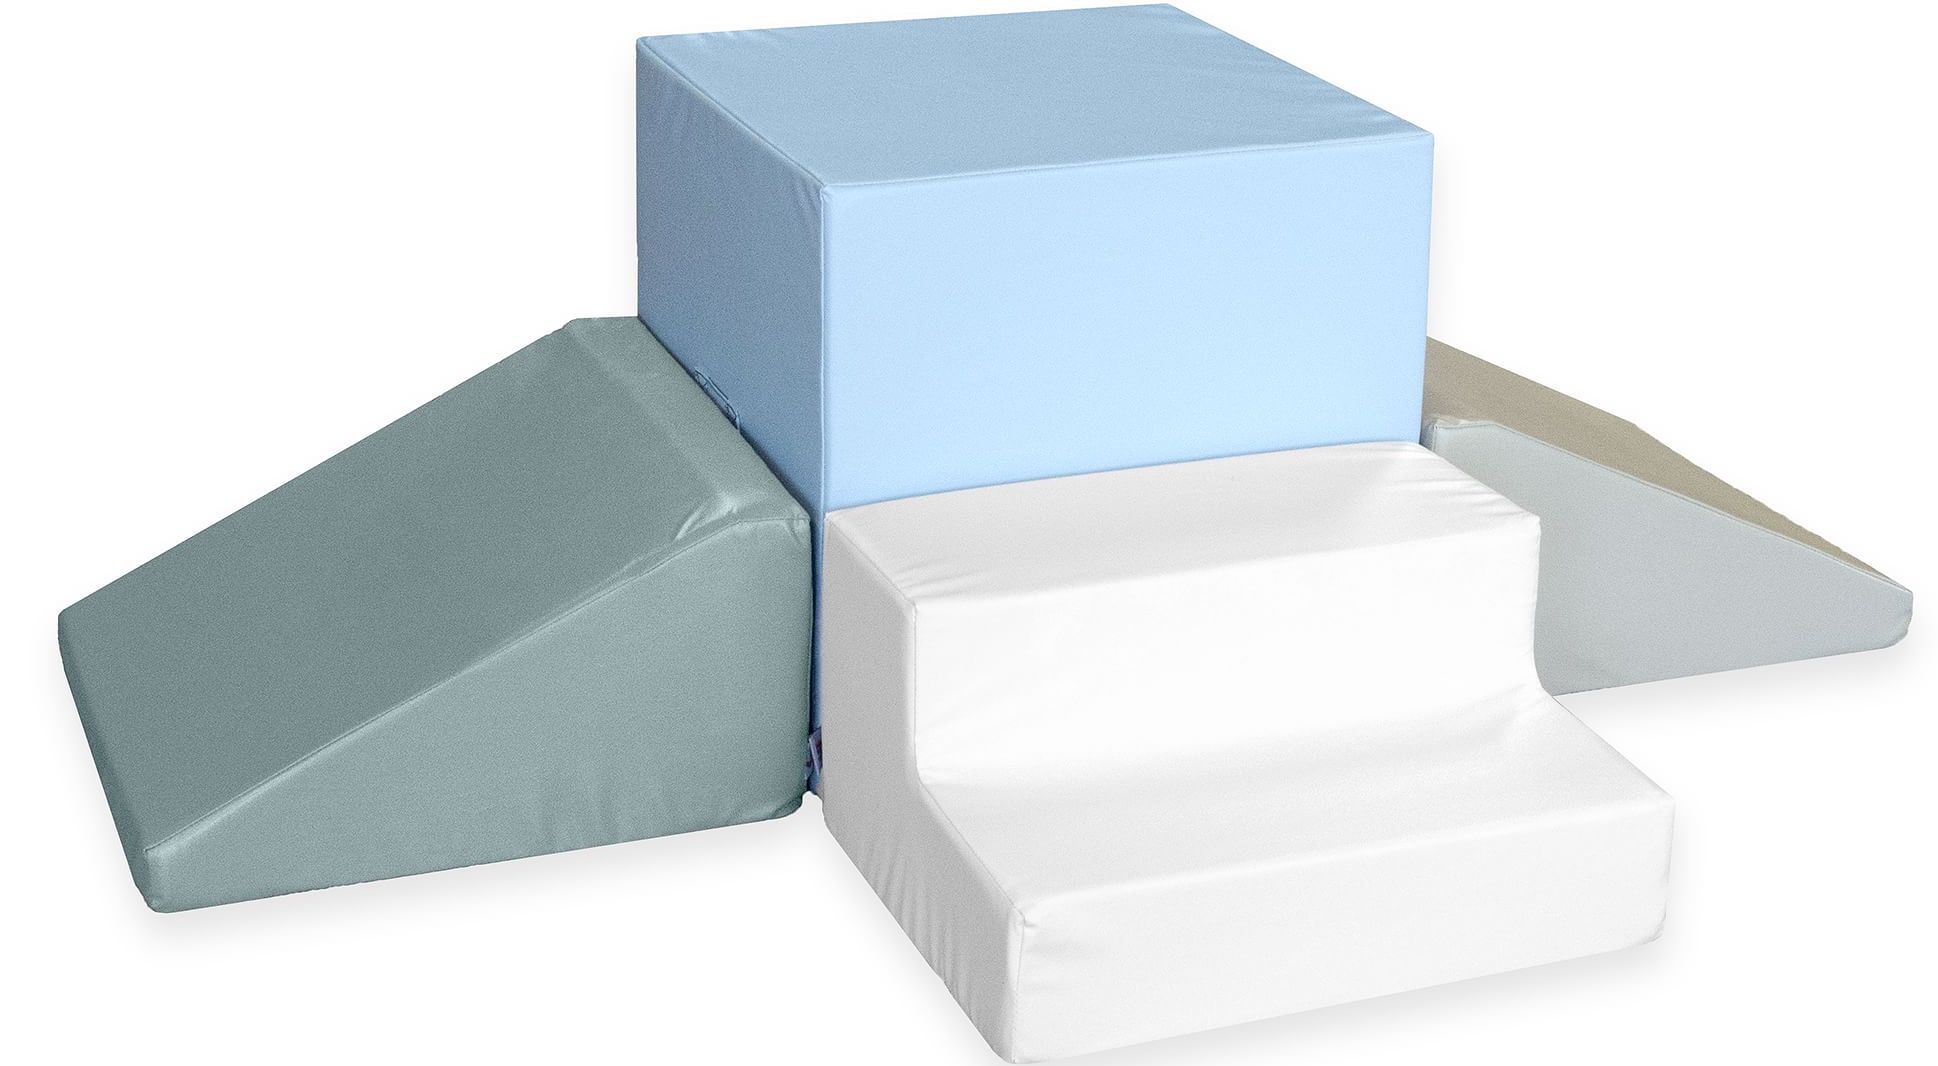 Blue, white, and green foam blocks in different shapes for kids to climb on